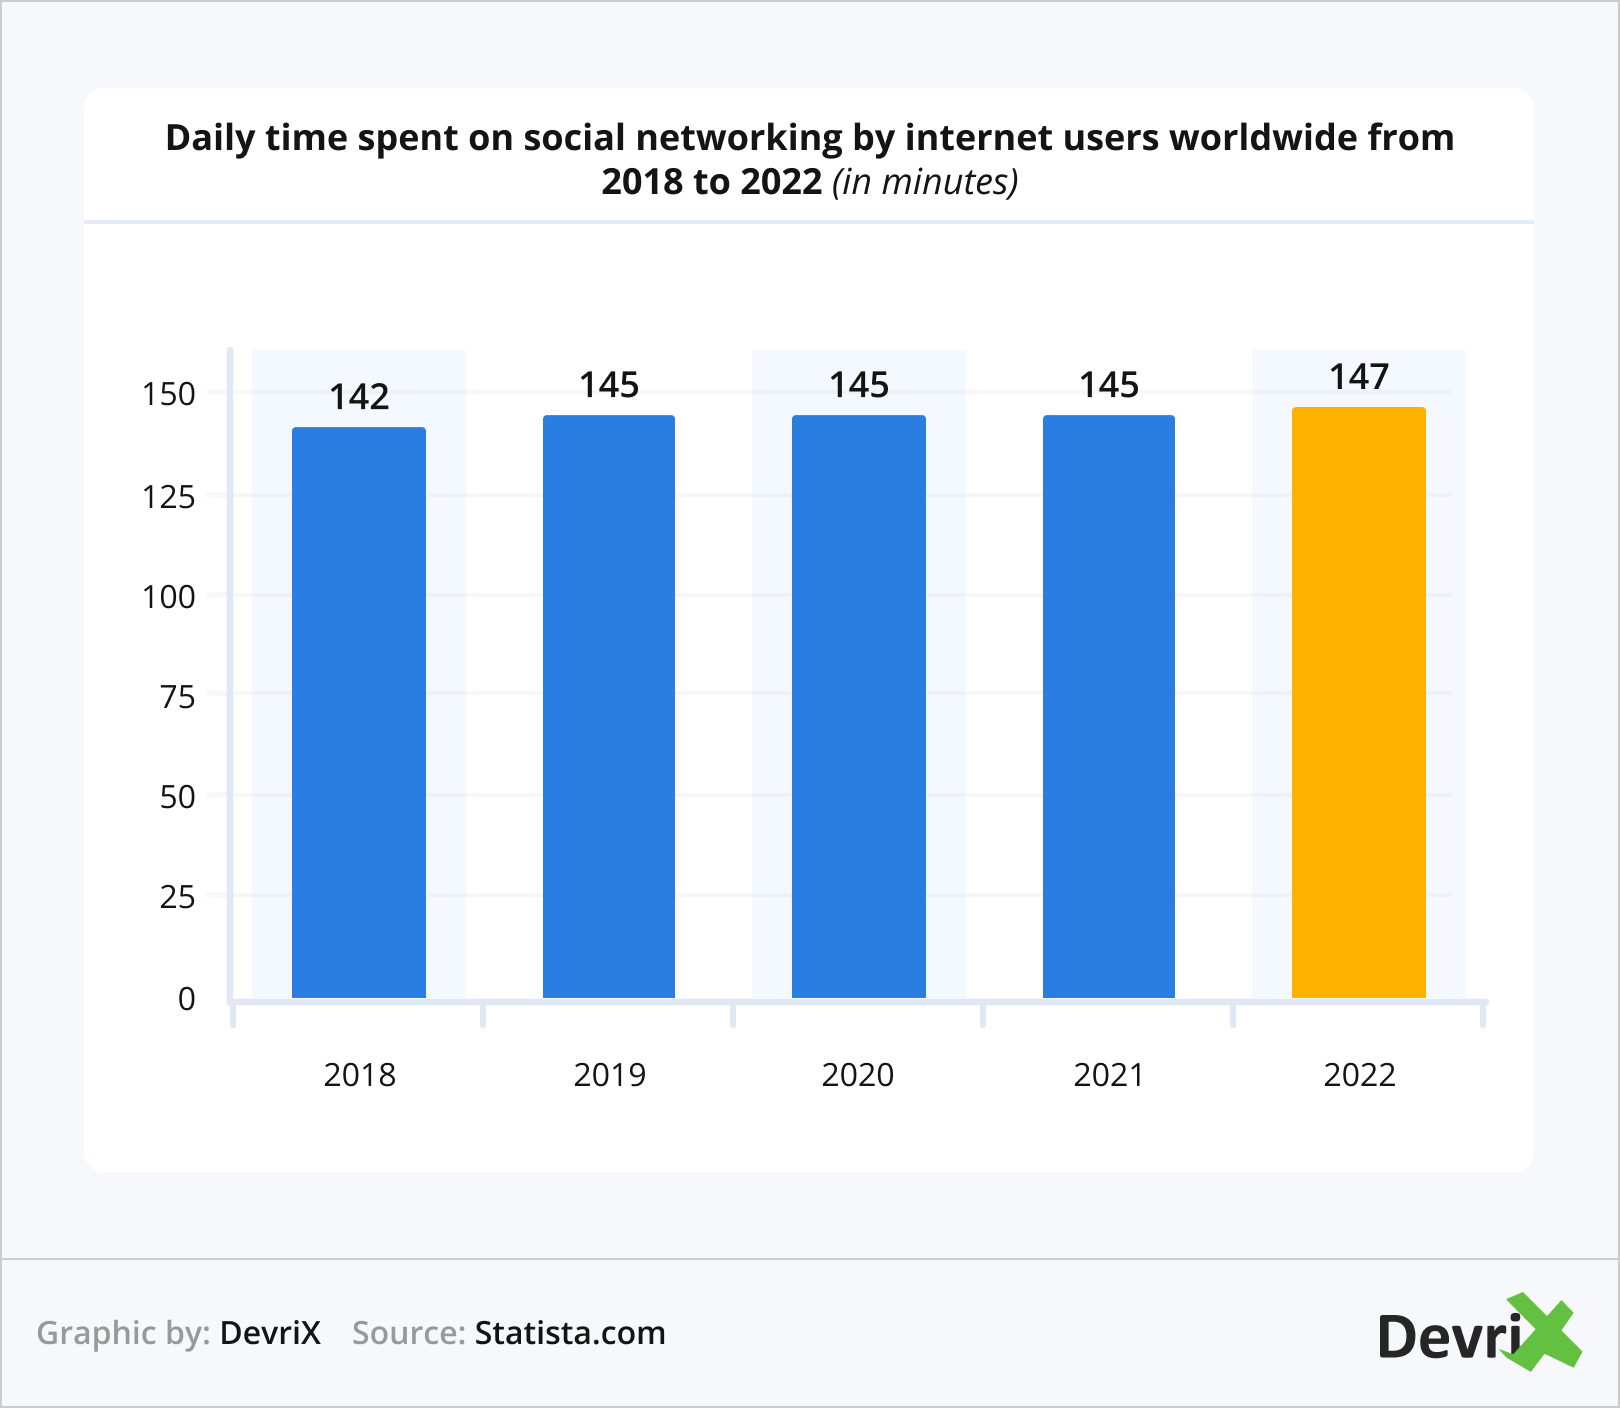 Daily time spent on social networking by internet users worldwide from 2018 to 2022 (in minutes)